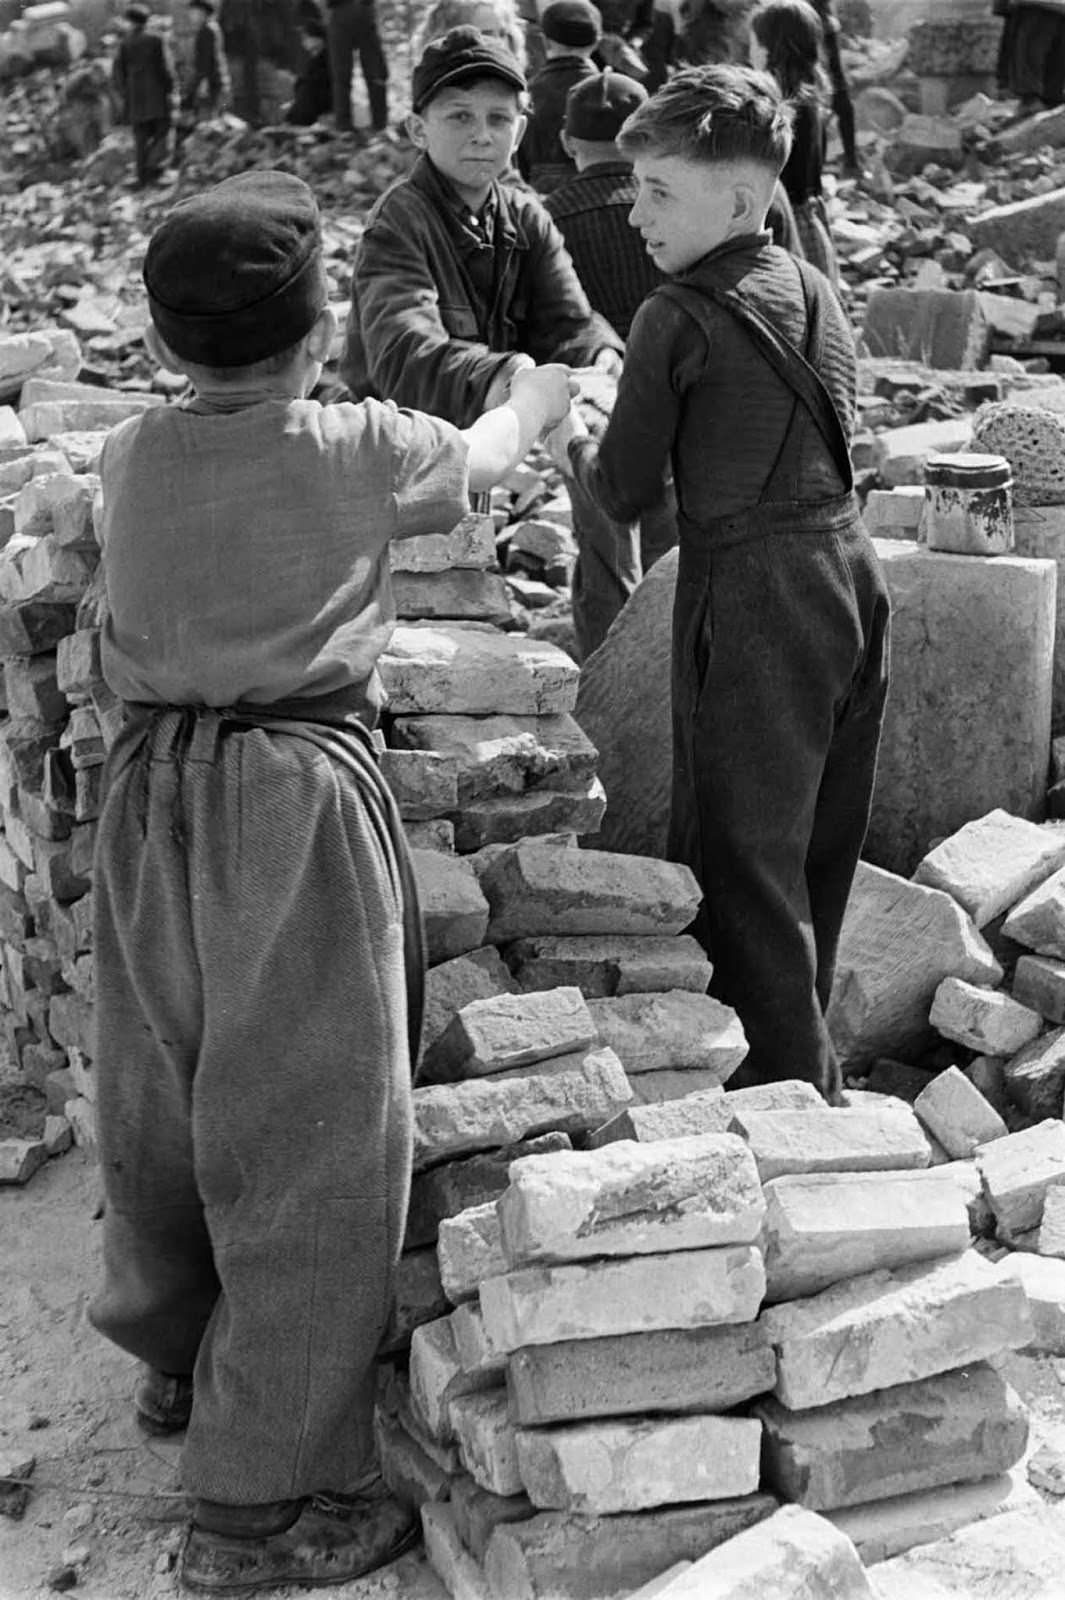 Children cleaning up the ruined city.